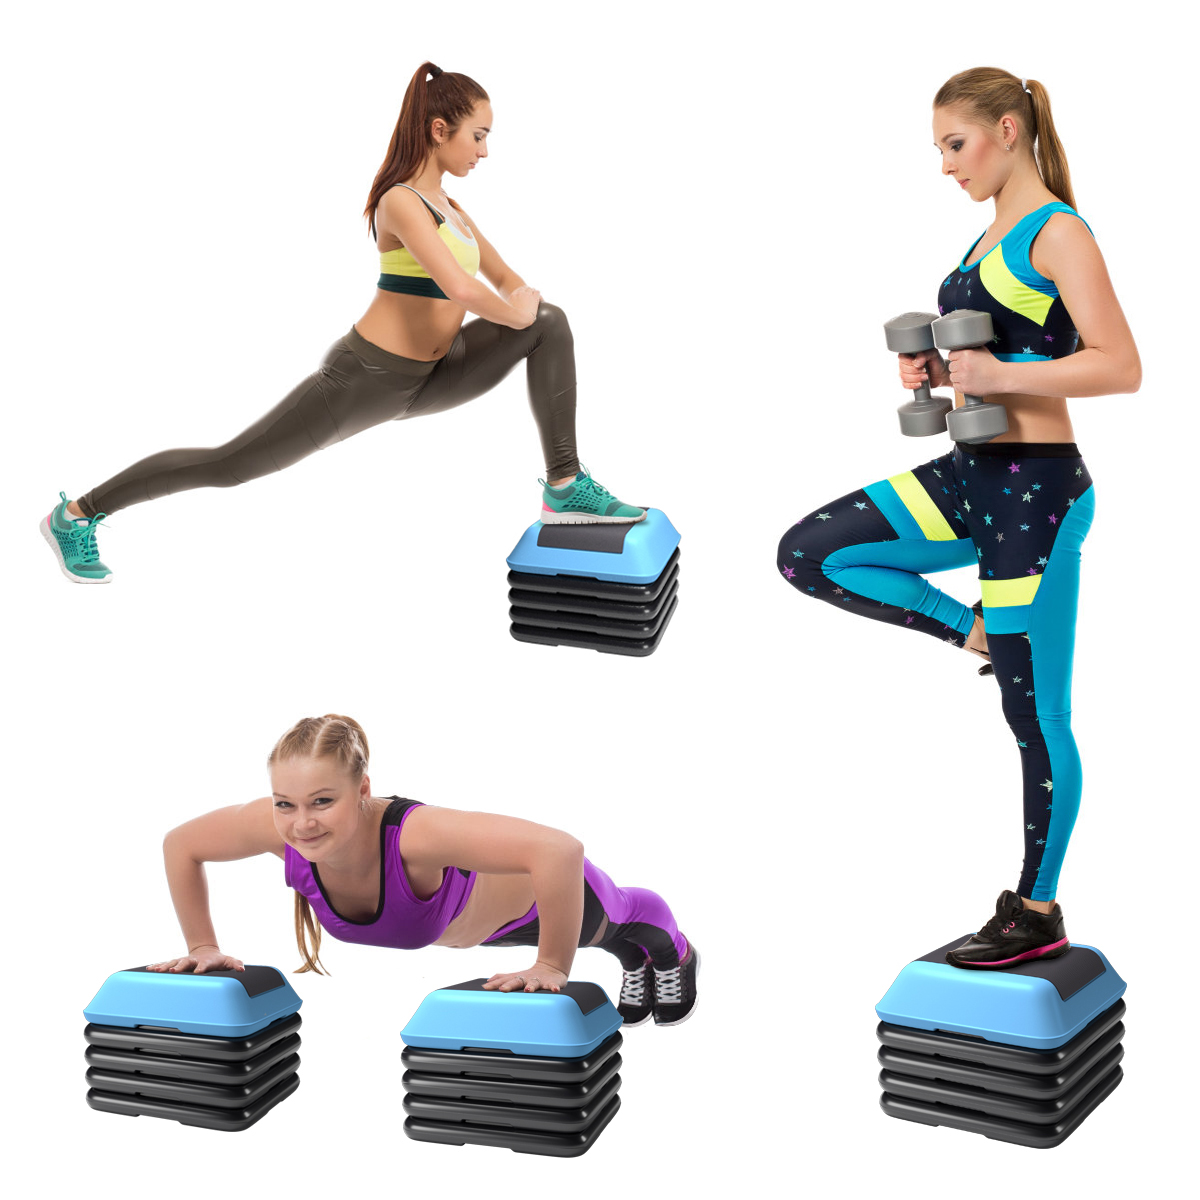 Costway 16''Aerobic Step System 4 Risers Fitness Exercise Stepper Platform Cardio Workout